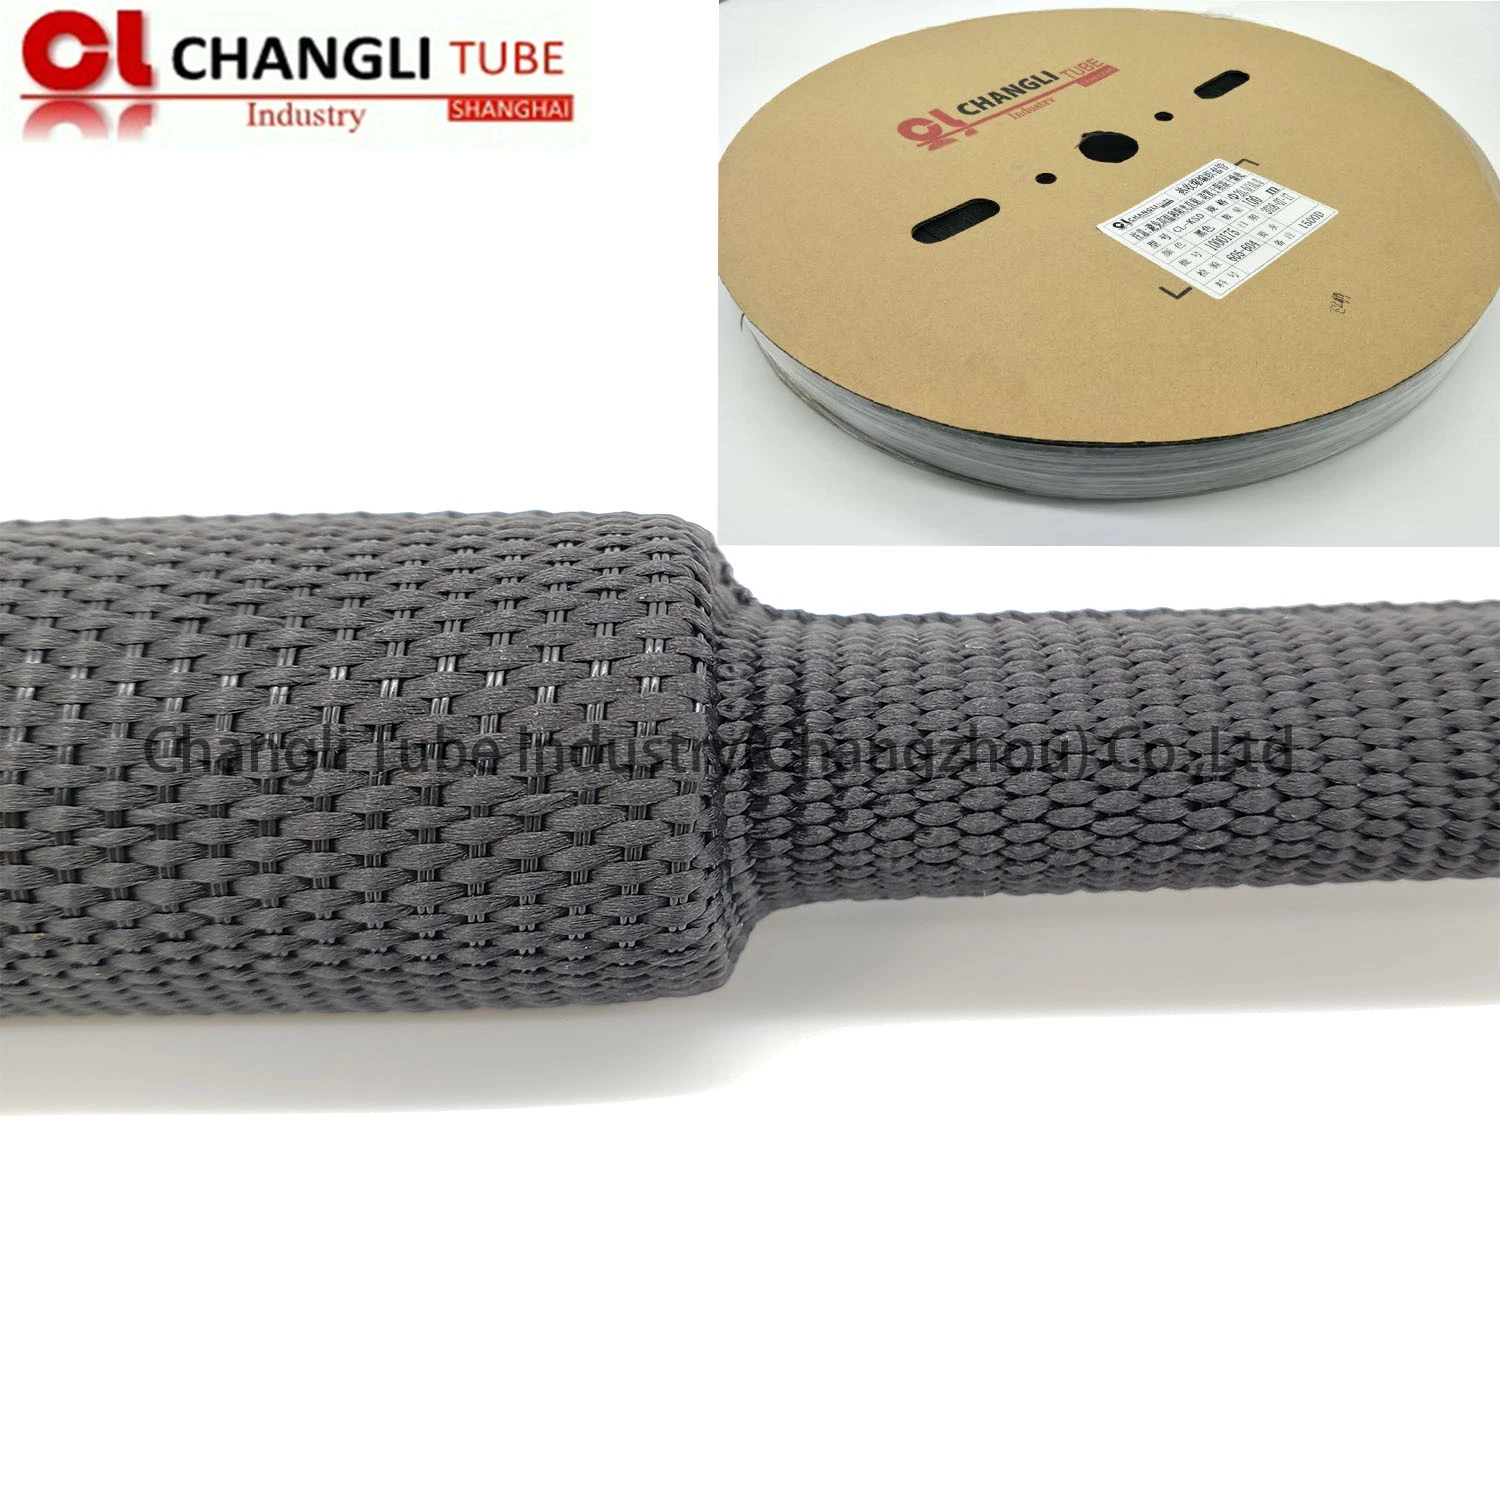 Woven Fabric Heat Shrinkable Braided Sleeve for Cable Management